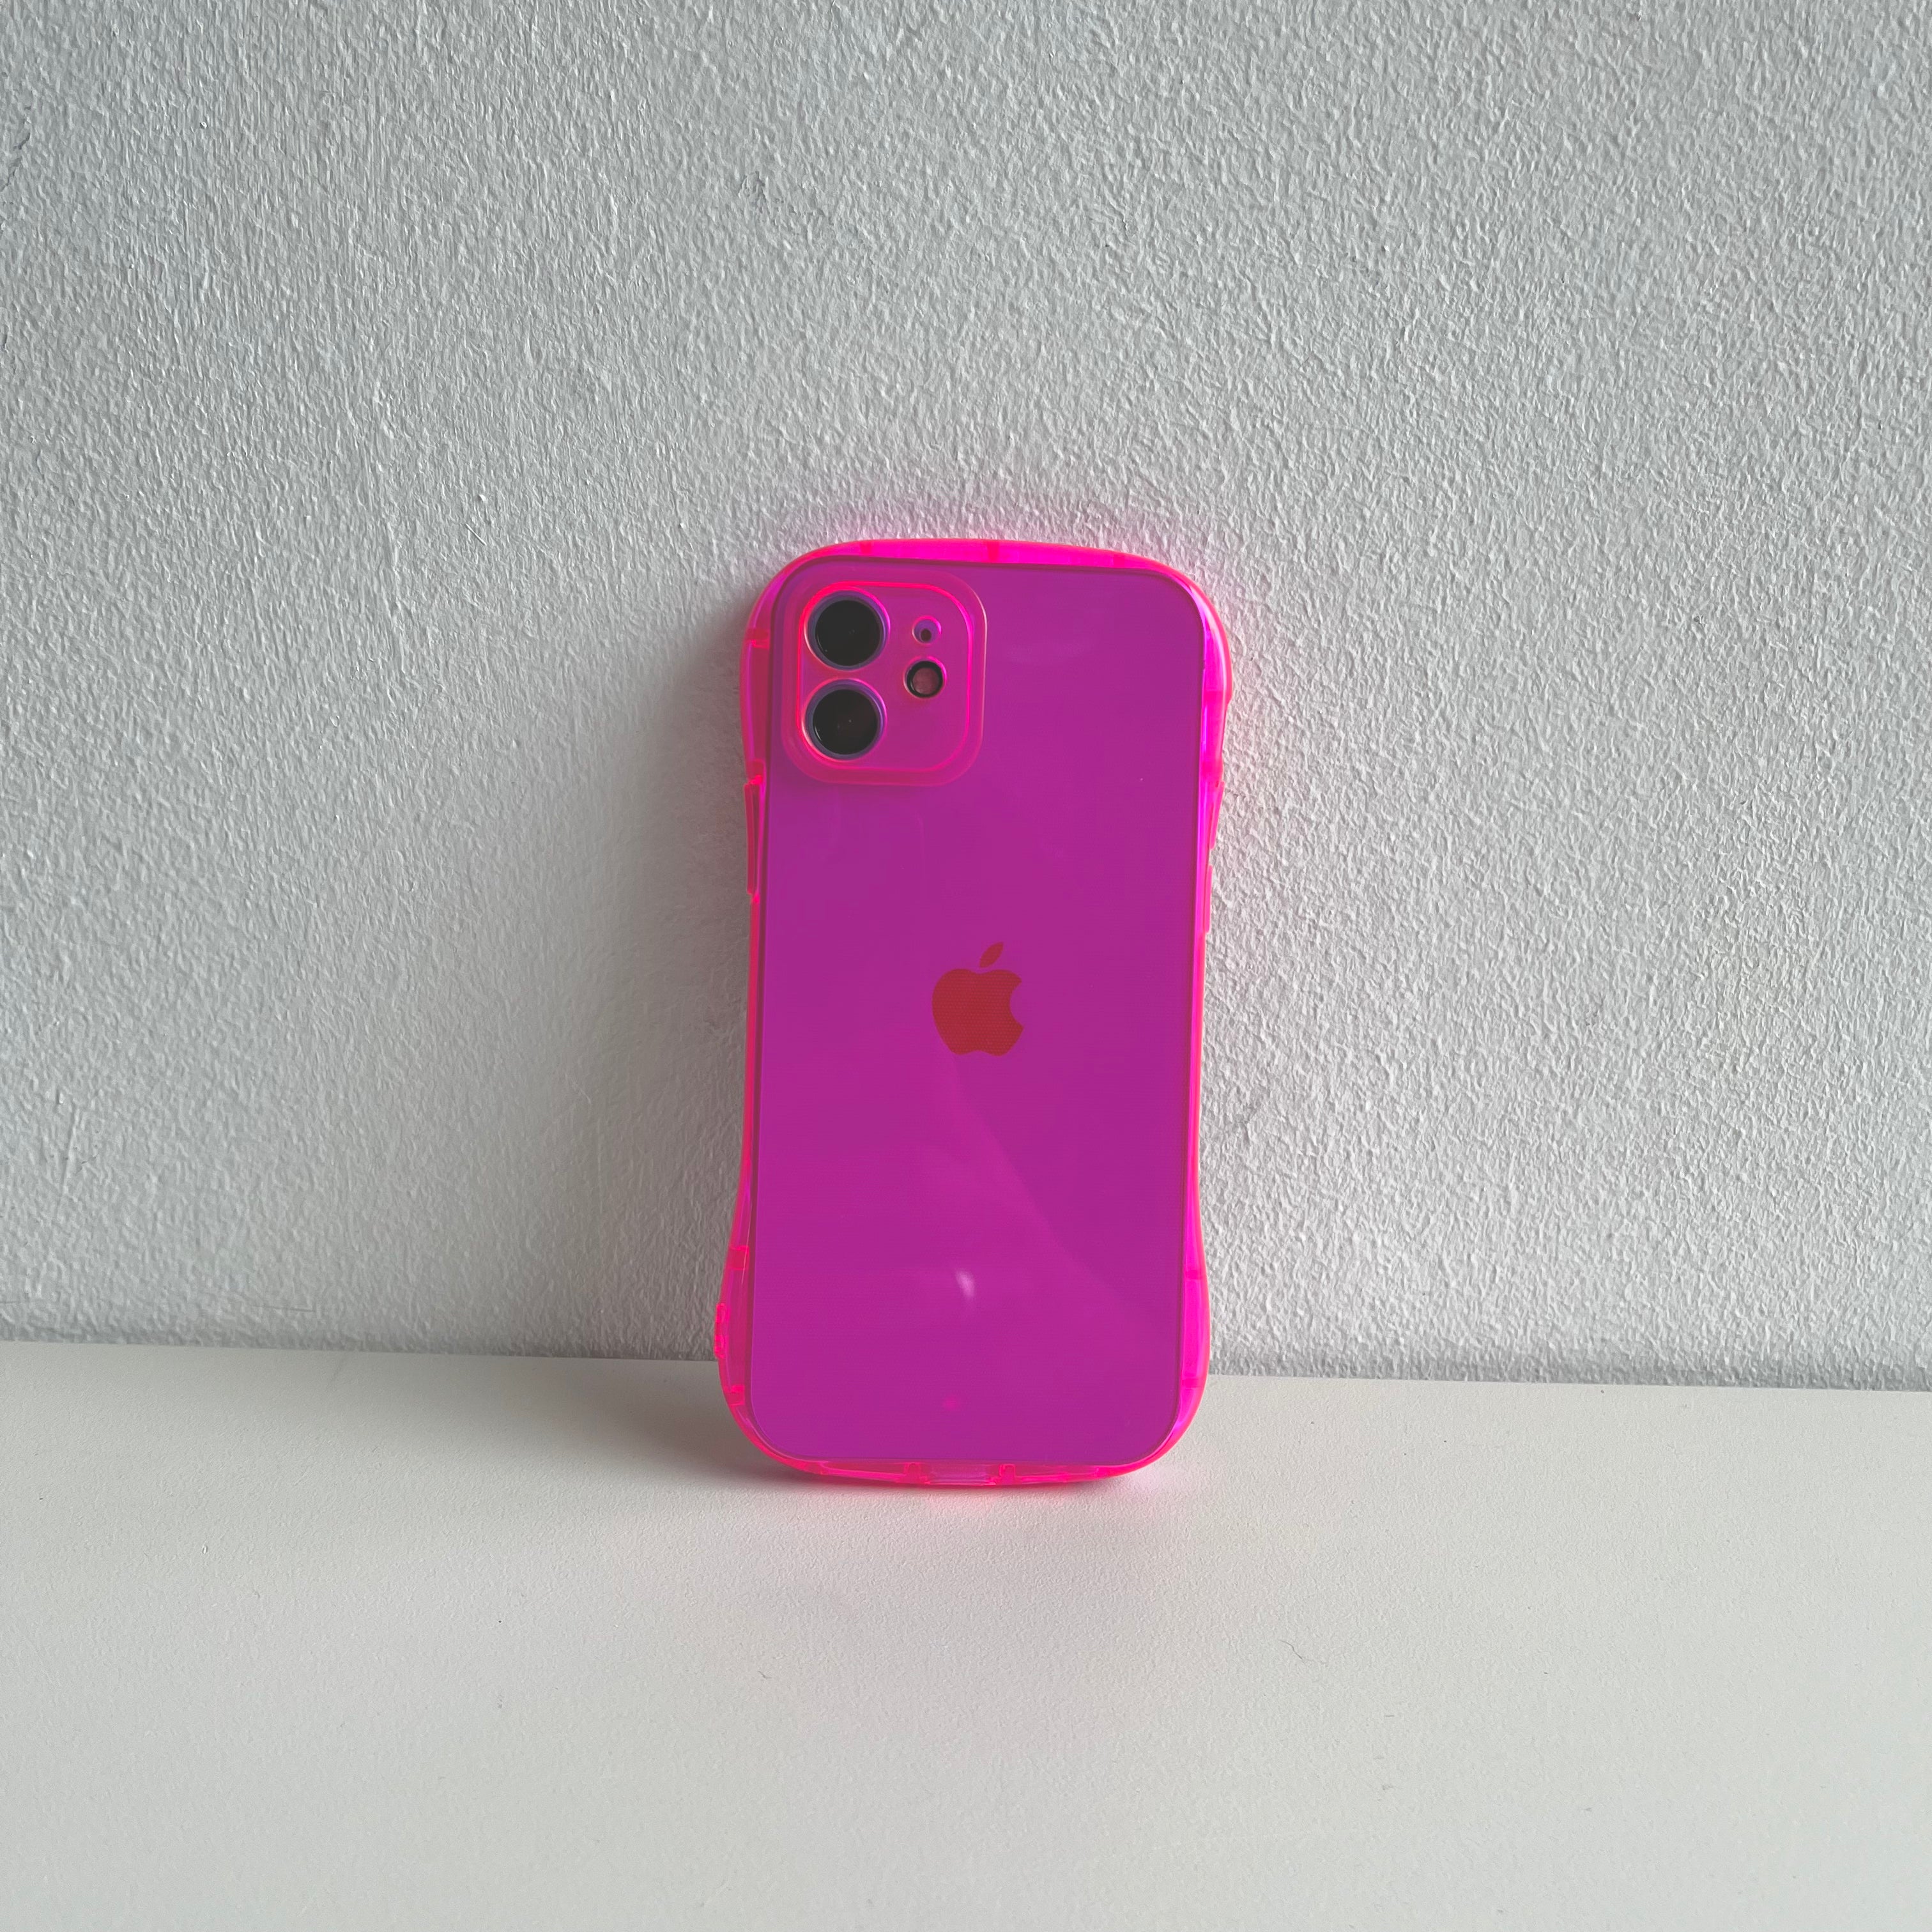 Neon Pink Jelly iPhone Case by Veronique